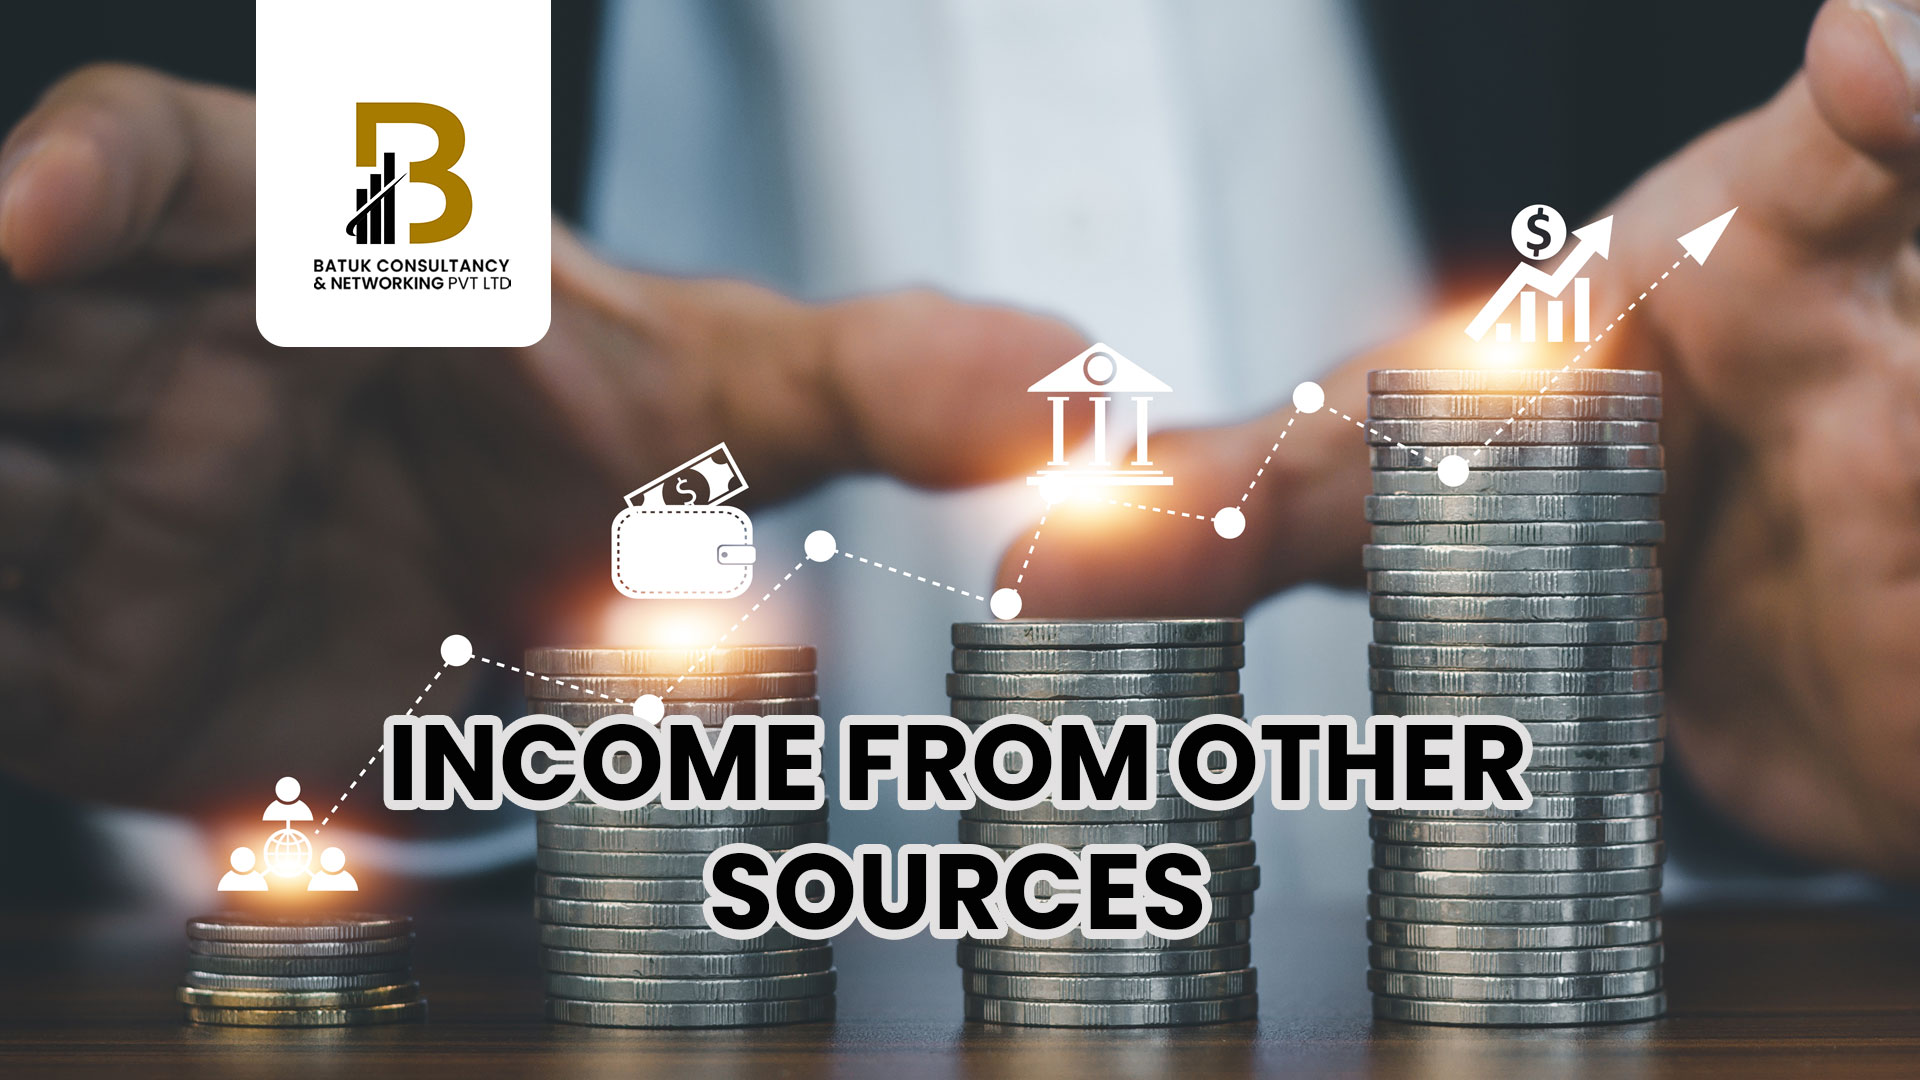 INCOME FROM OTHER SOURCES